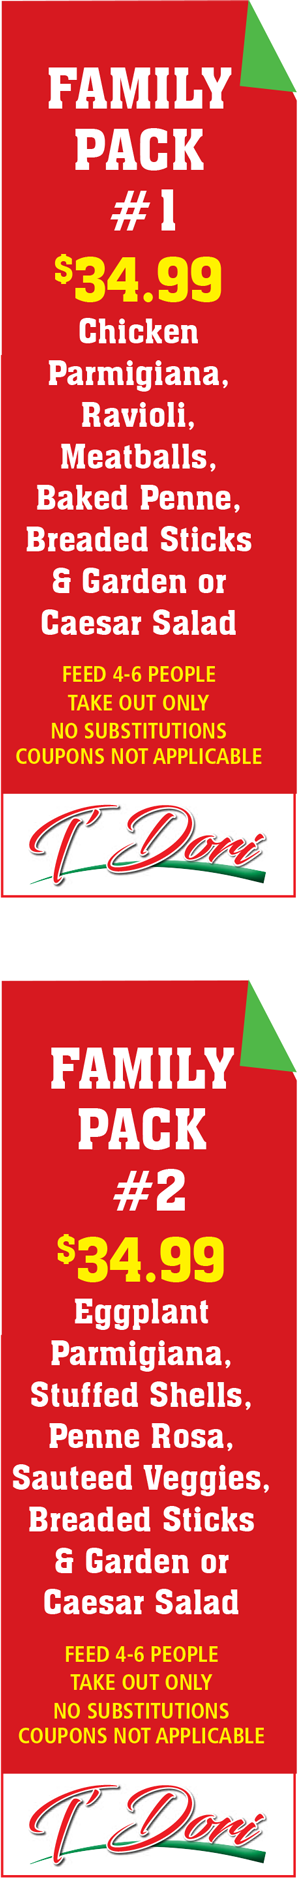 T Dori Takeout Specials Special Catering Offers Italian Food